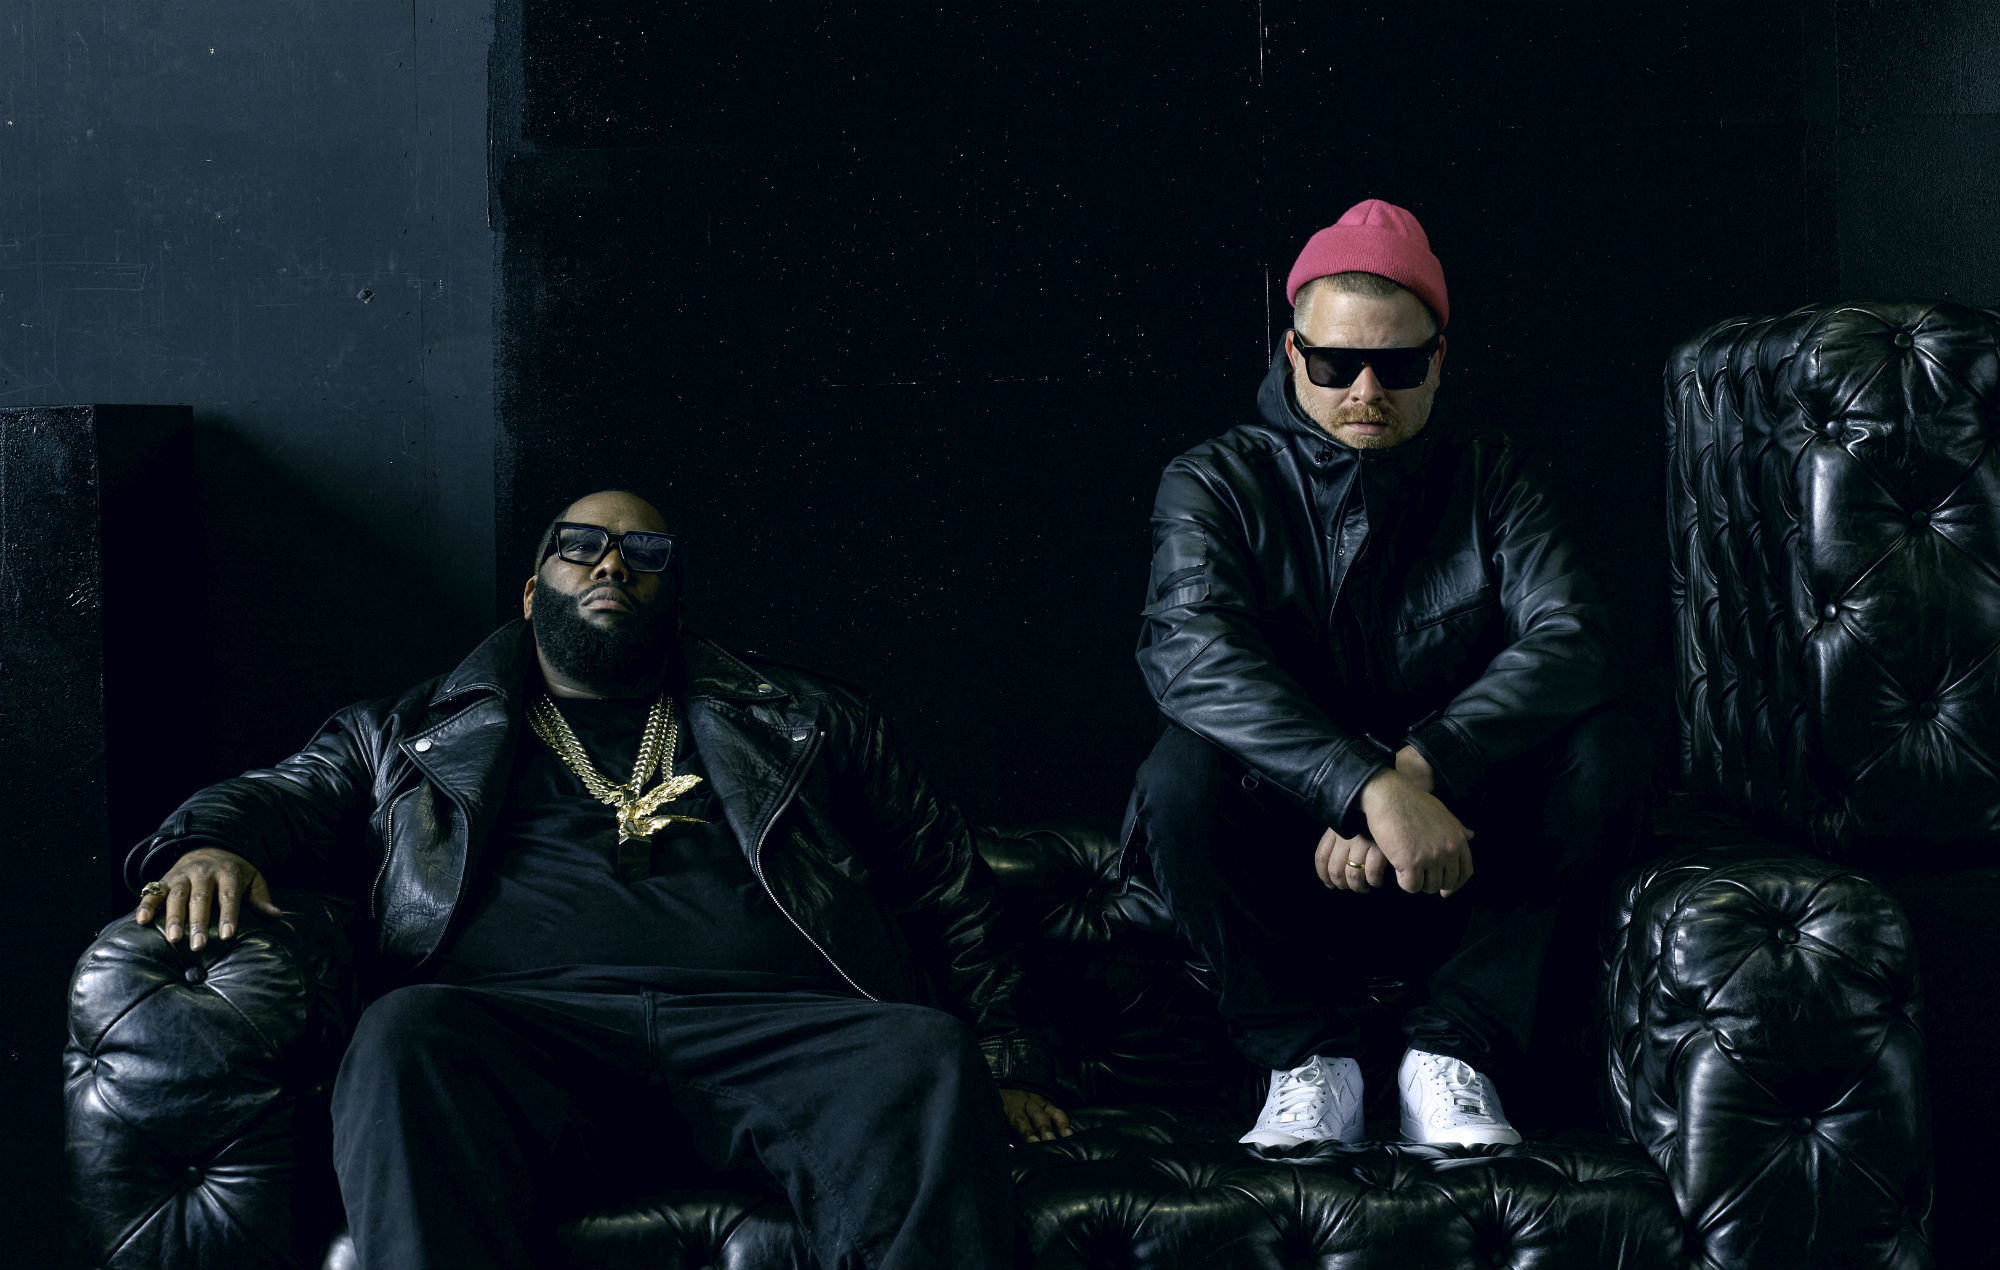 Watch Run The Jewels’ brilliant reaction to winning NME’s Album of the Year 2020